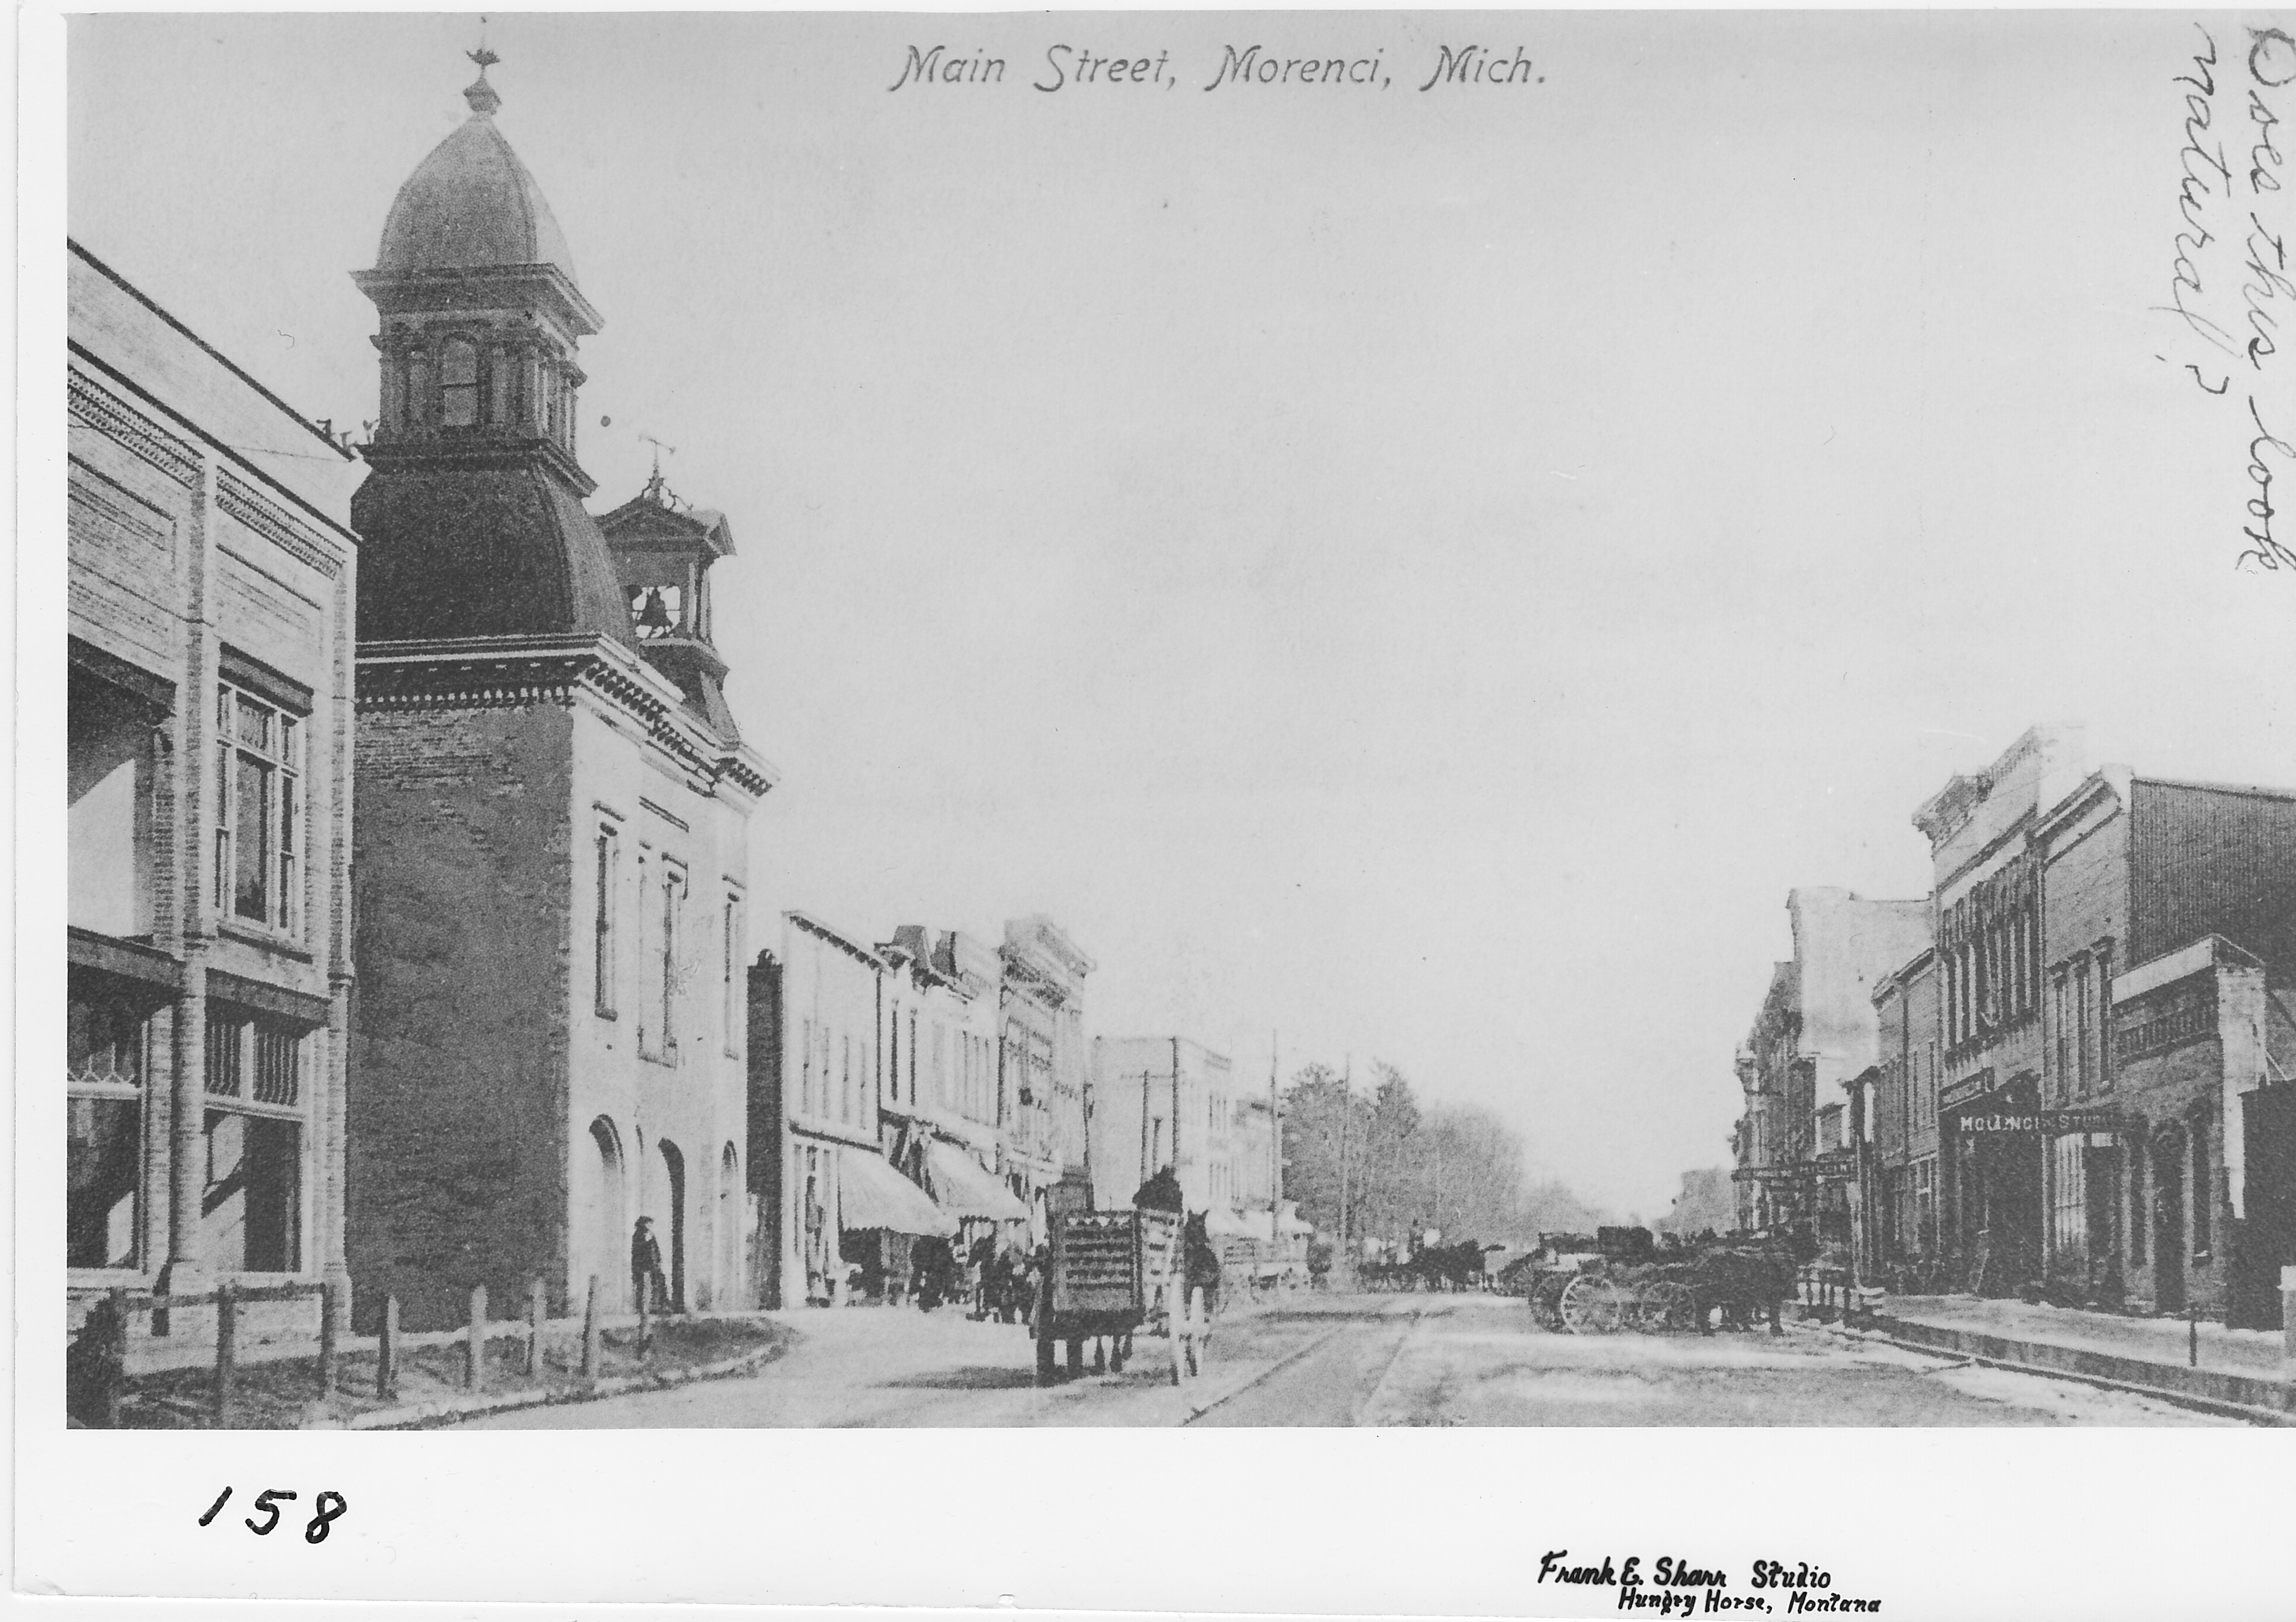 Main Street looking east from City Hall in February 1908.